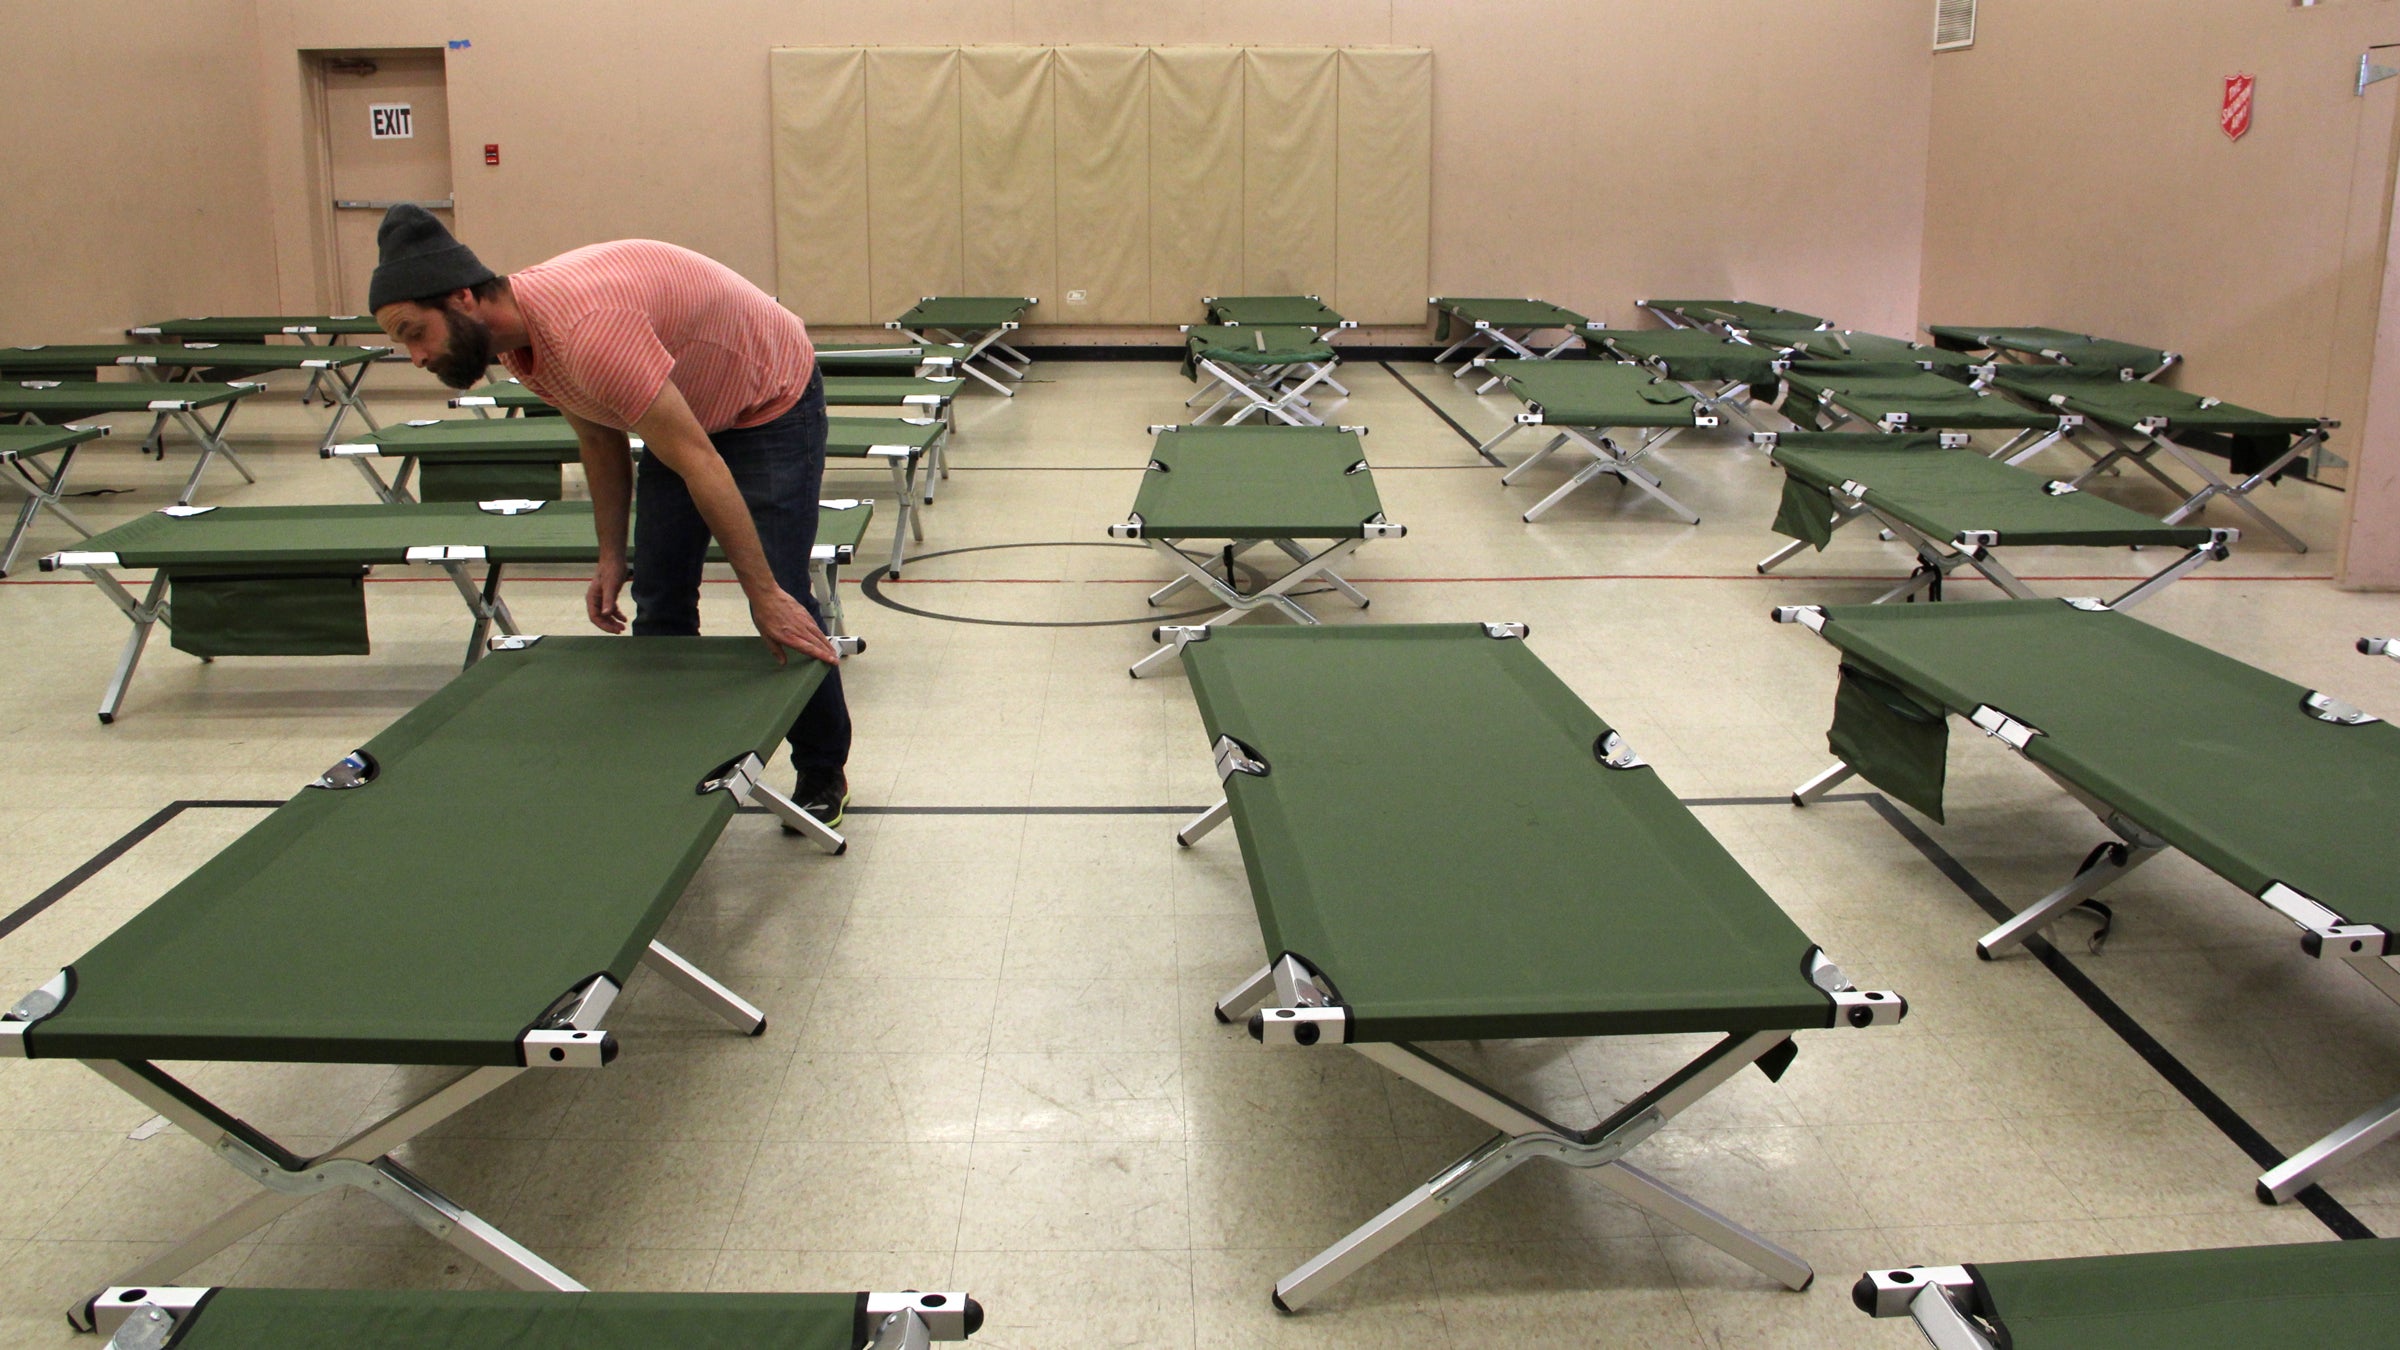 Joel Snyder, housing case manager for the Salvation Army in Norristown, sets up cots for the homeless in the organization's basement gym. (Emma Lee/WHYY) 